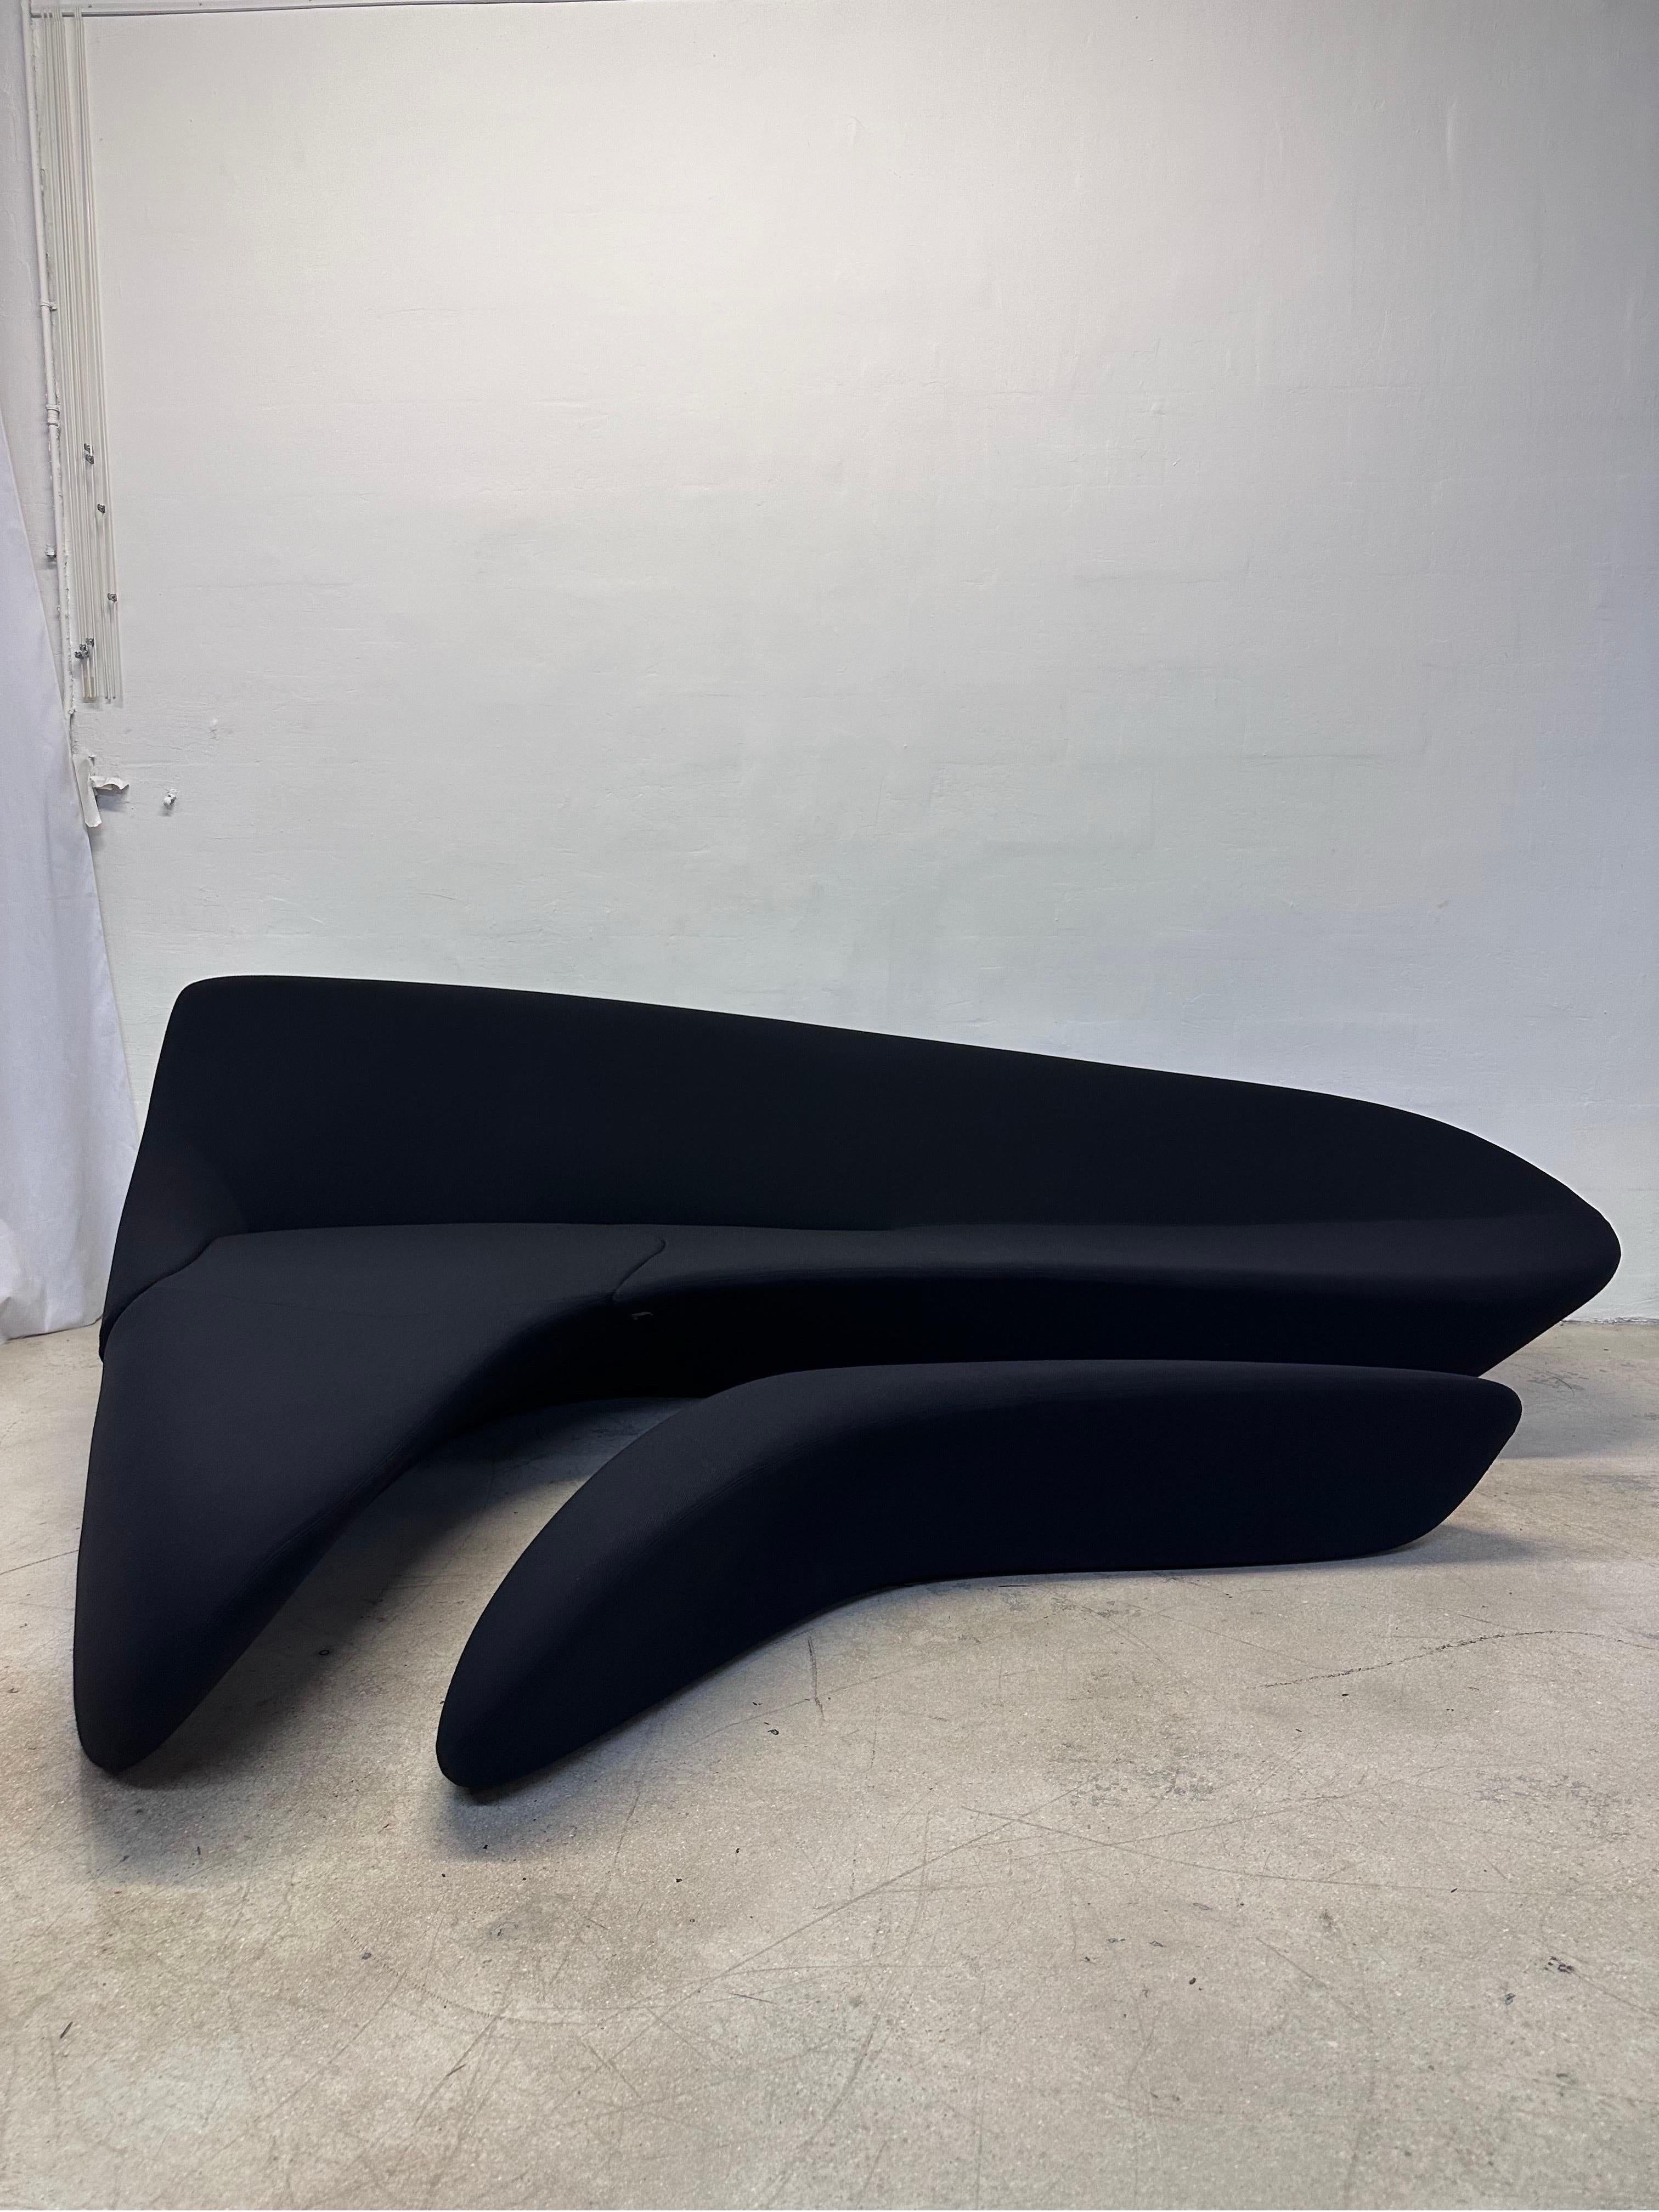 Sculptural curvilinear sofa and foot rest by renowned architect and designer Zaha Hadid.  The steel and foam frame is covered in a black cotton stetch fabric. The footrest fits snugly into the void beneath the sofa.  The collaboration between Zaha